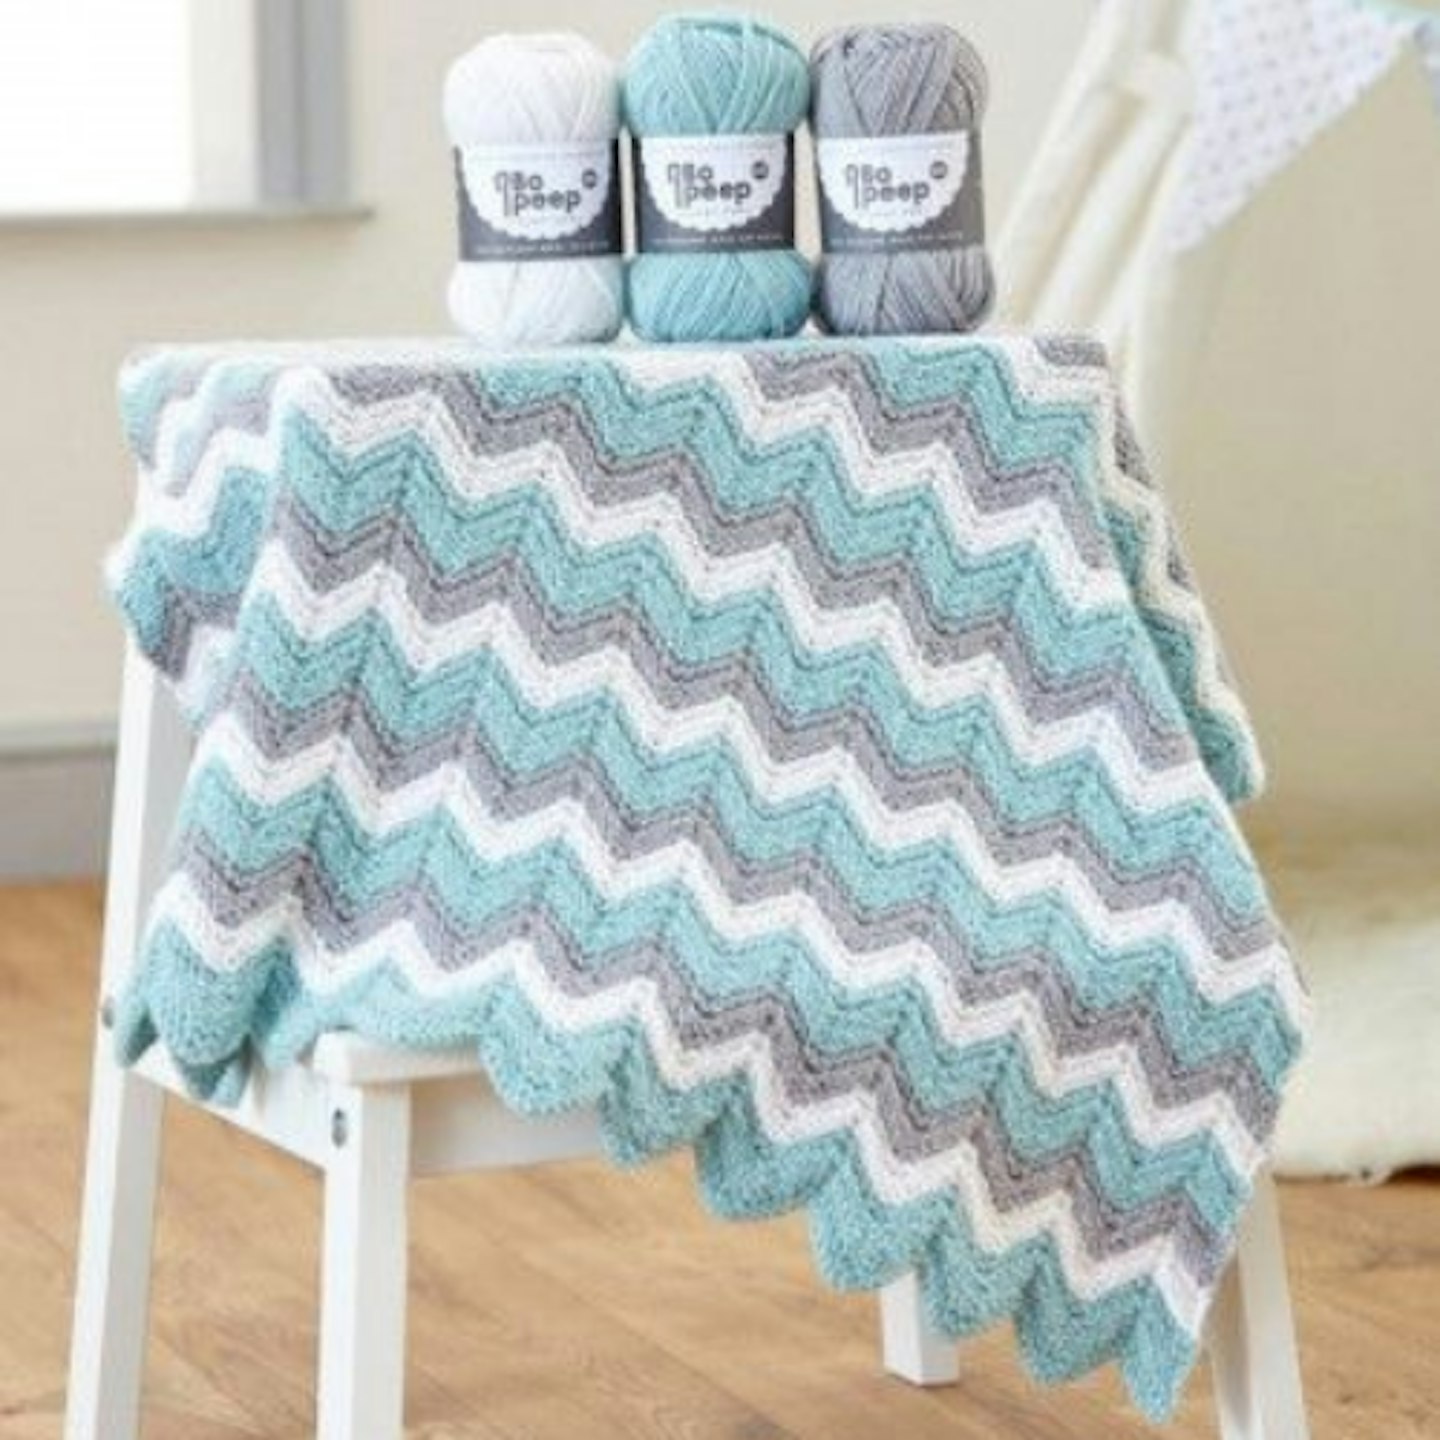 Knitted Zig-Zag Baby Blanket Kit mum to be gifts